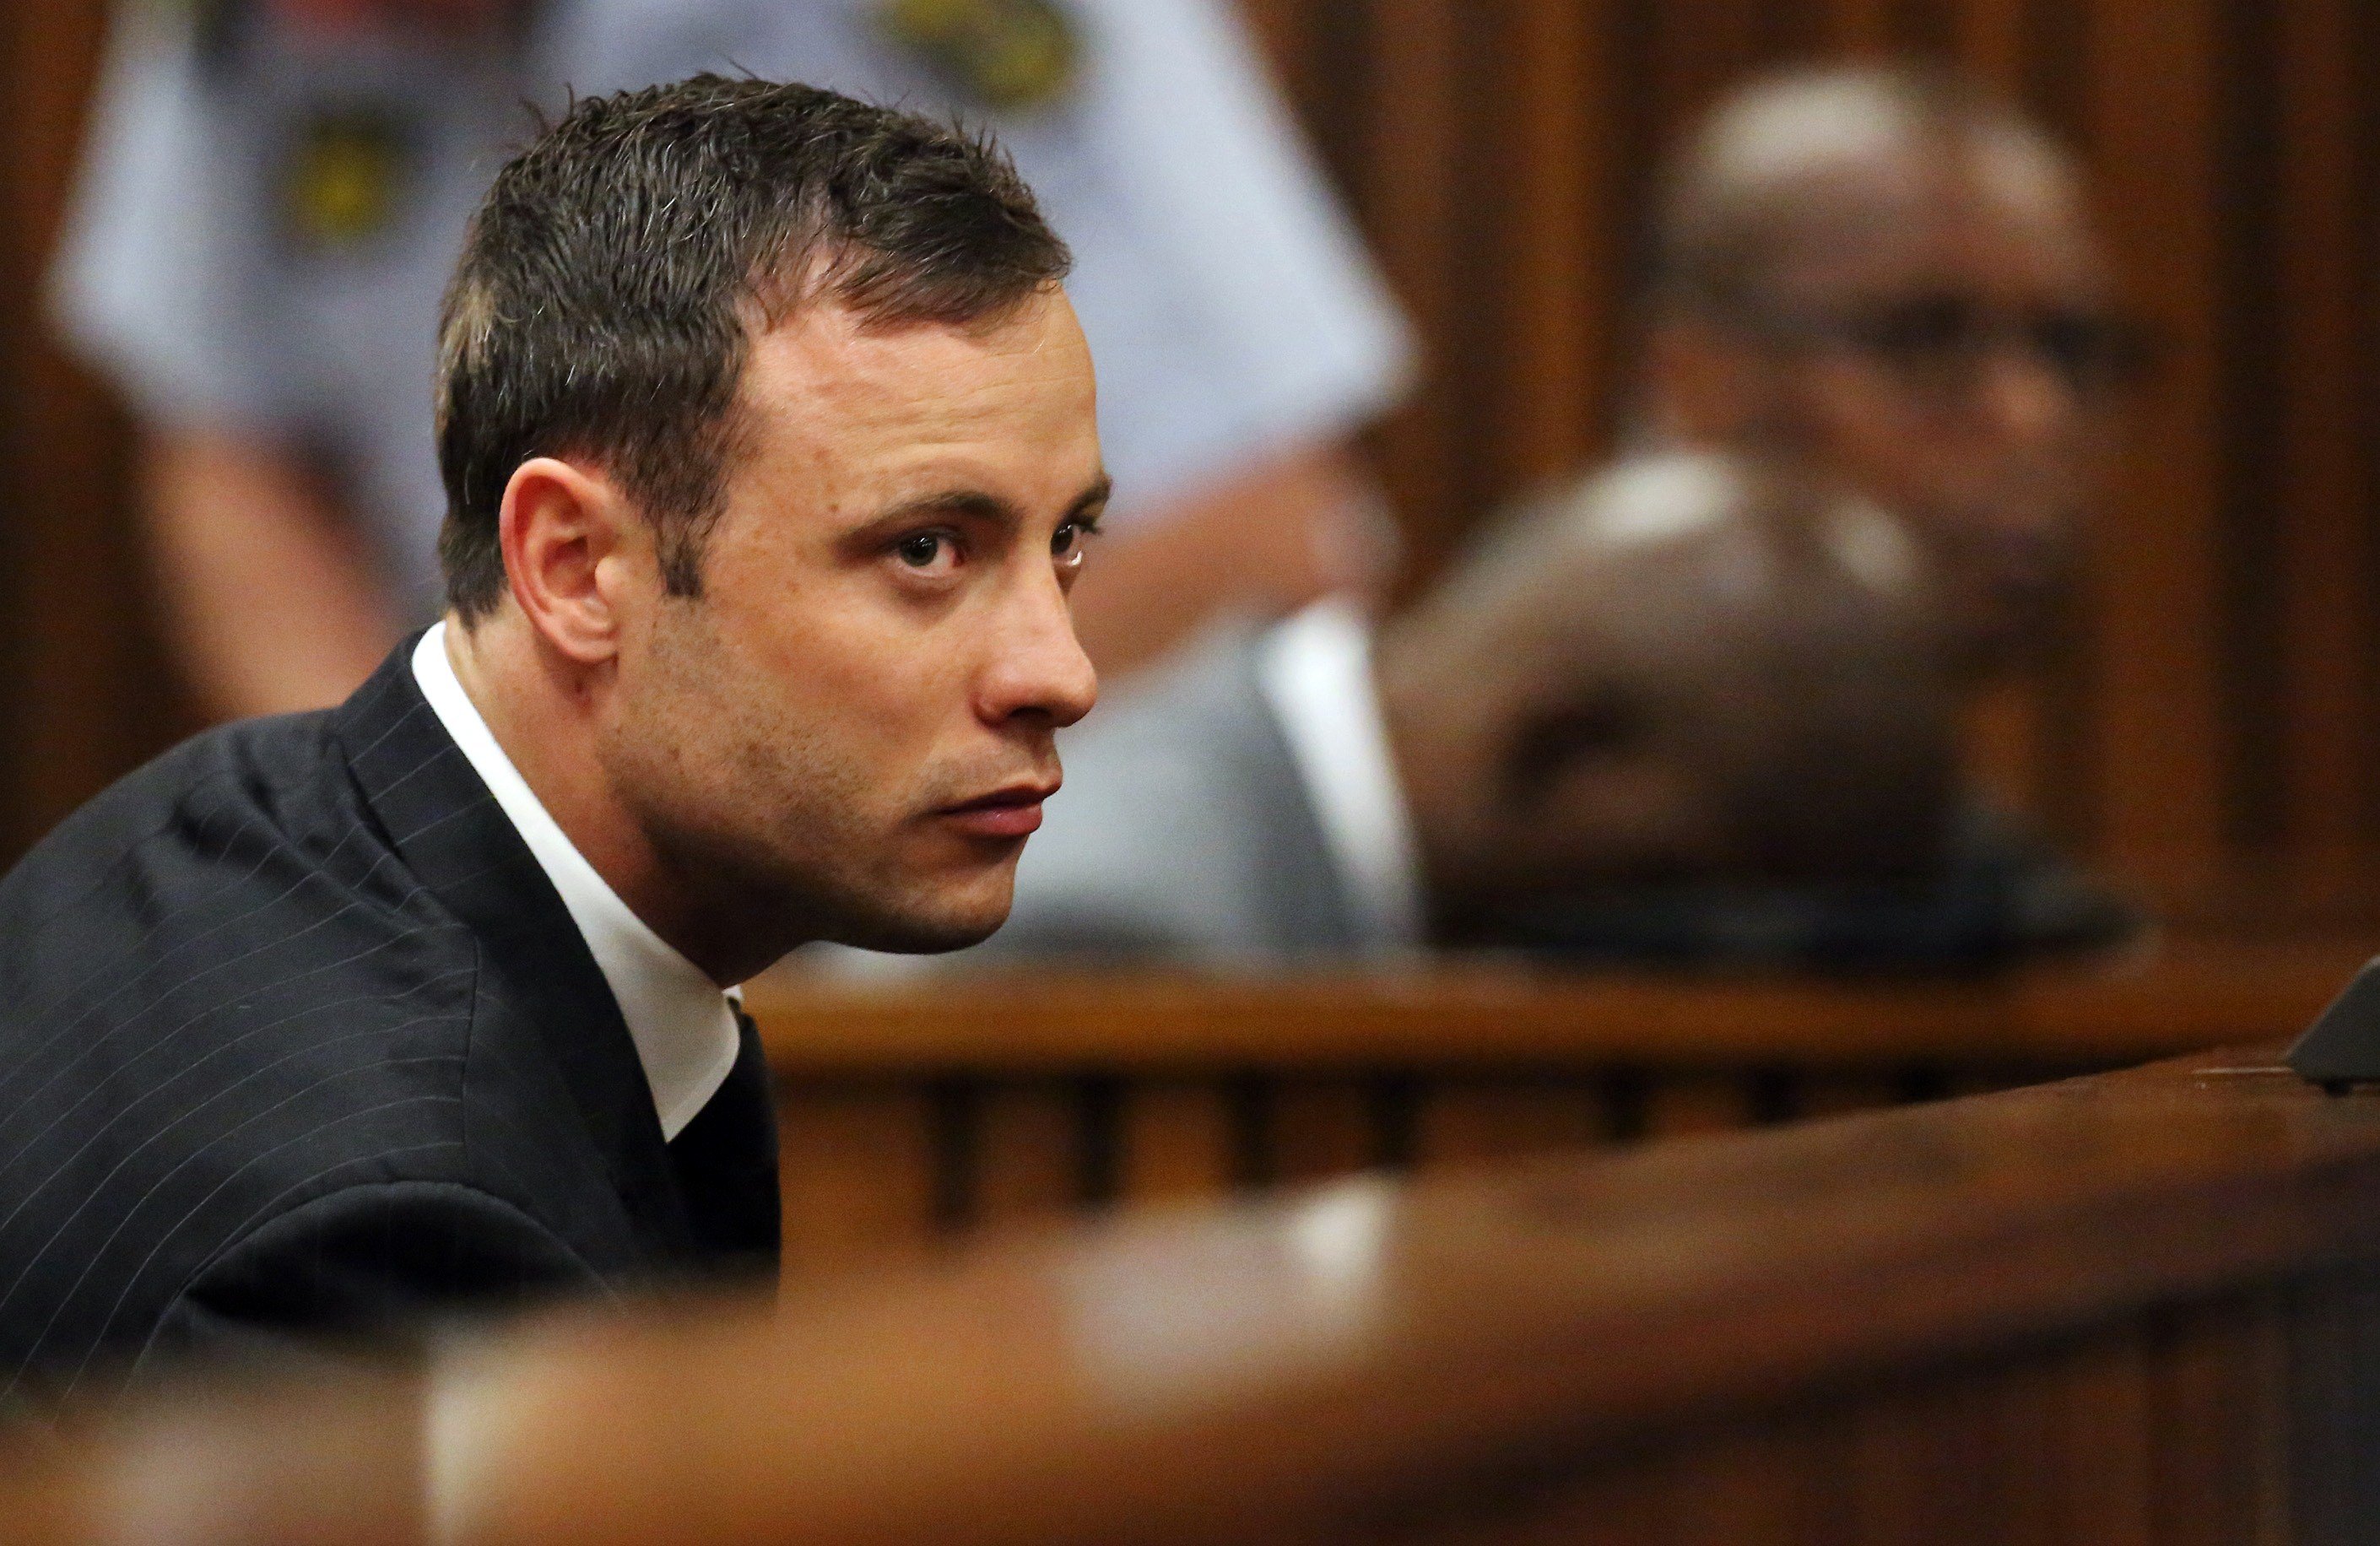 Oscar Pistorius listens to the verdict in his murder trial in the High Court in Pretoria on September 12, 2014. (Siphiwe Sibeko—AFP/Getty Images)